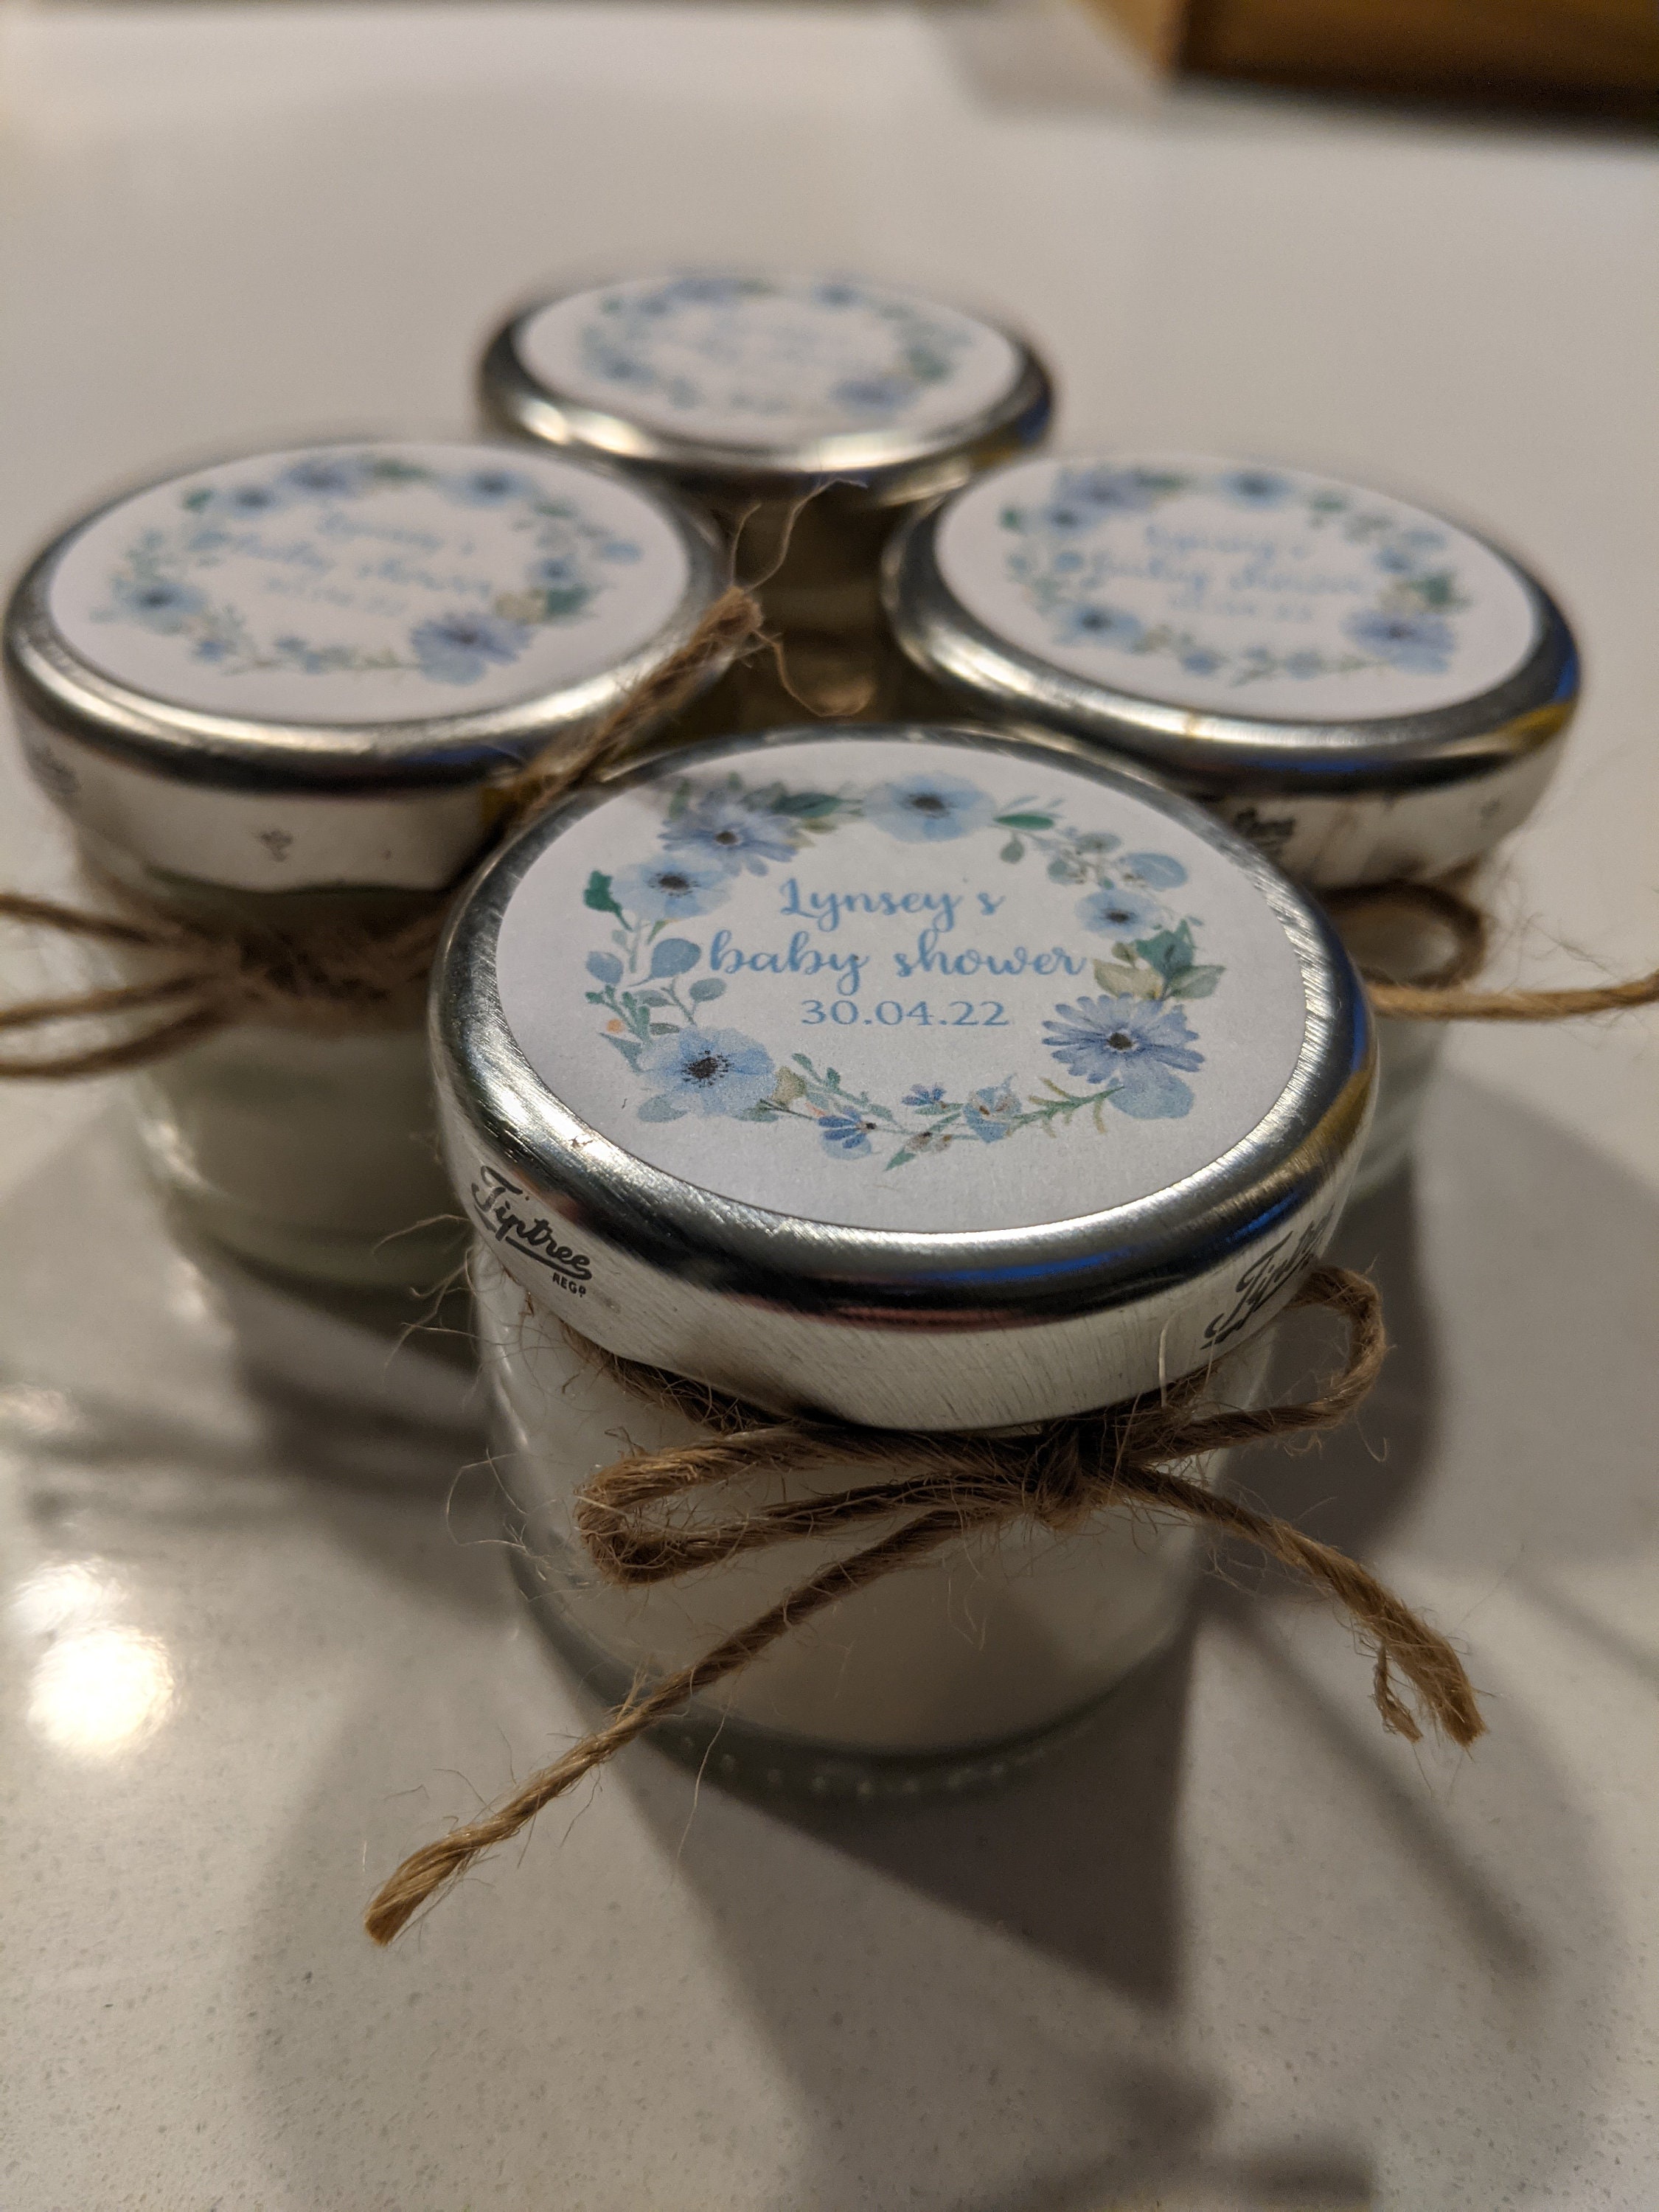 Handmade Soy Wax Jar Candles with White Flowers - Perfect Wedding Favors